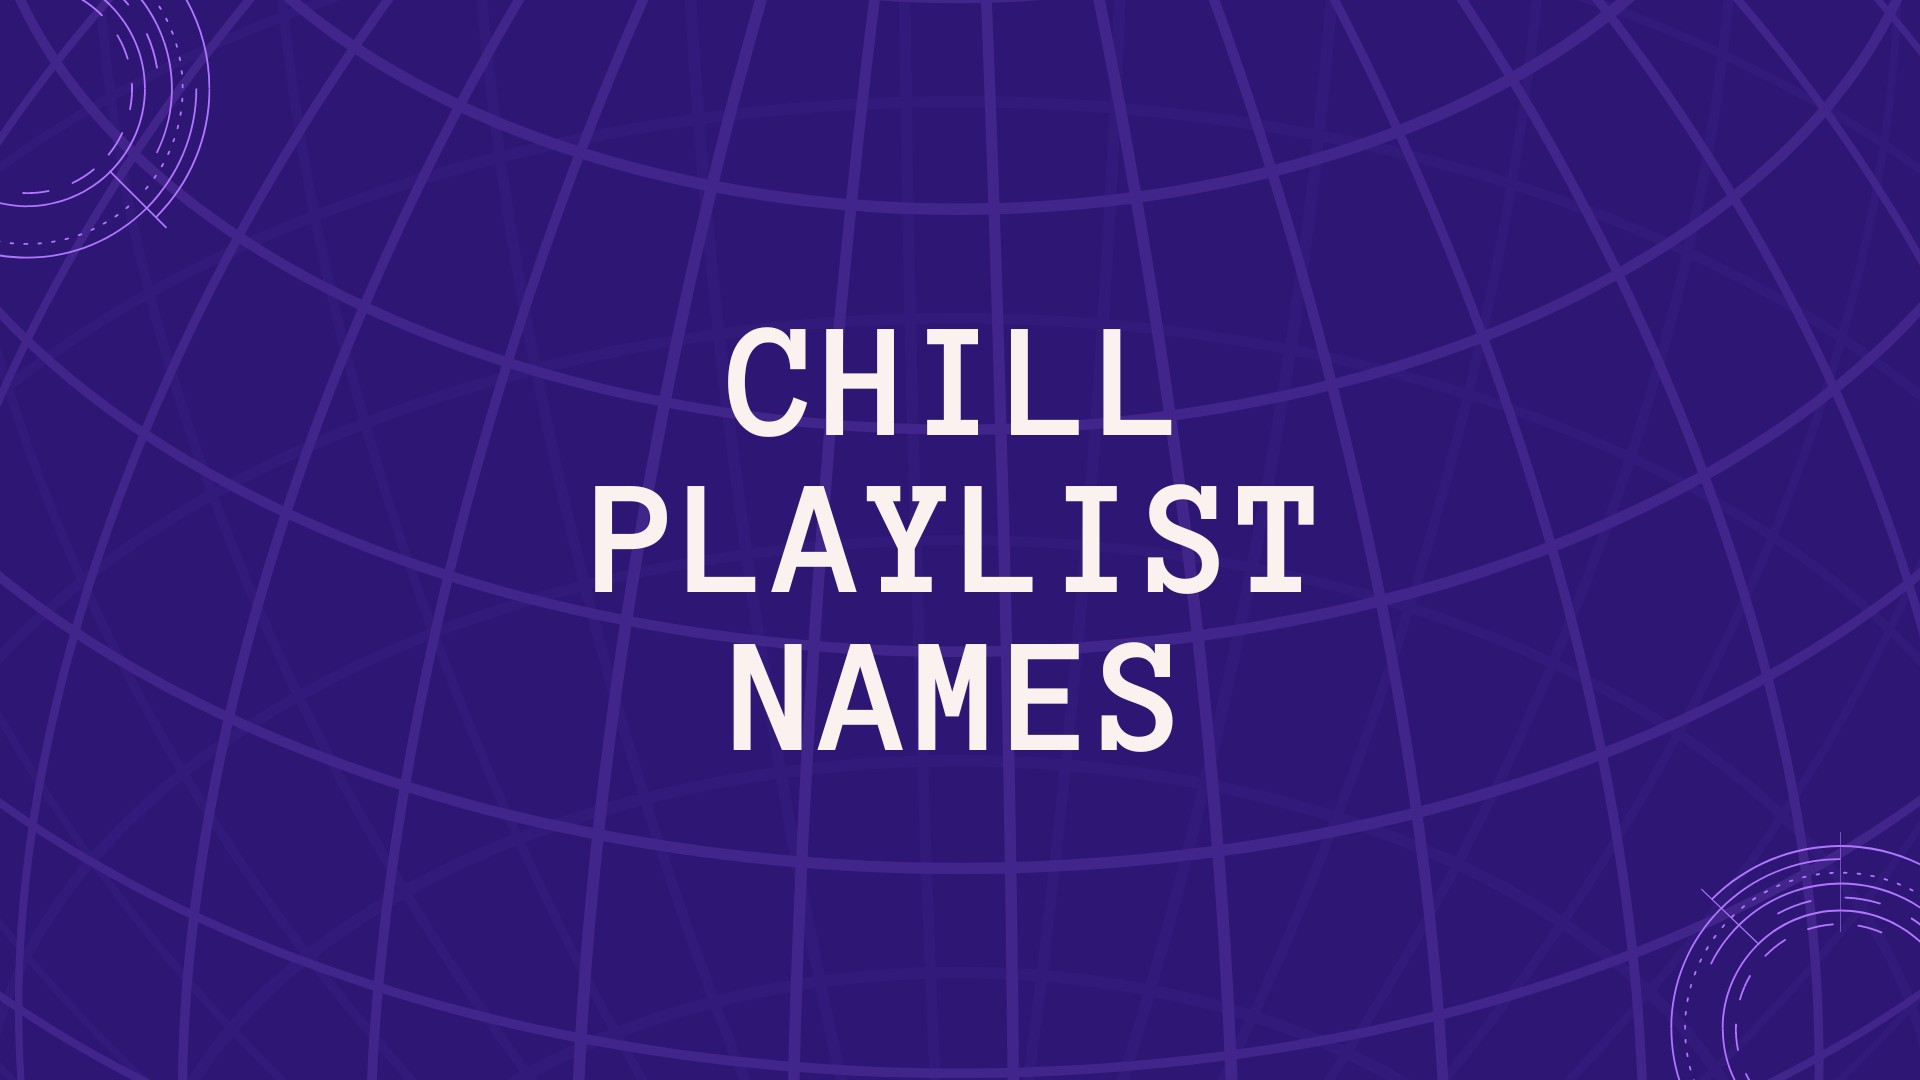 200+ Awesome Chill Playlist Names